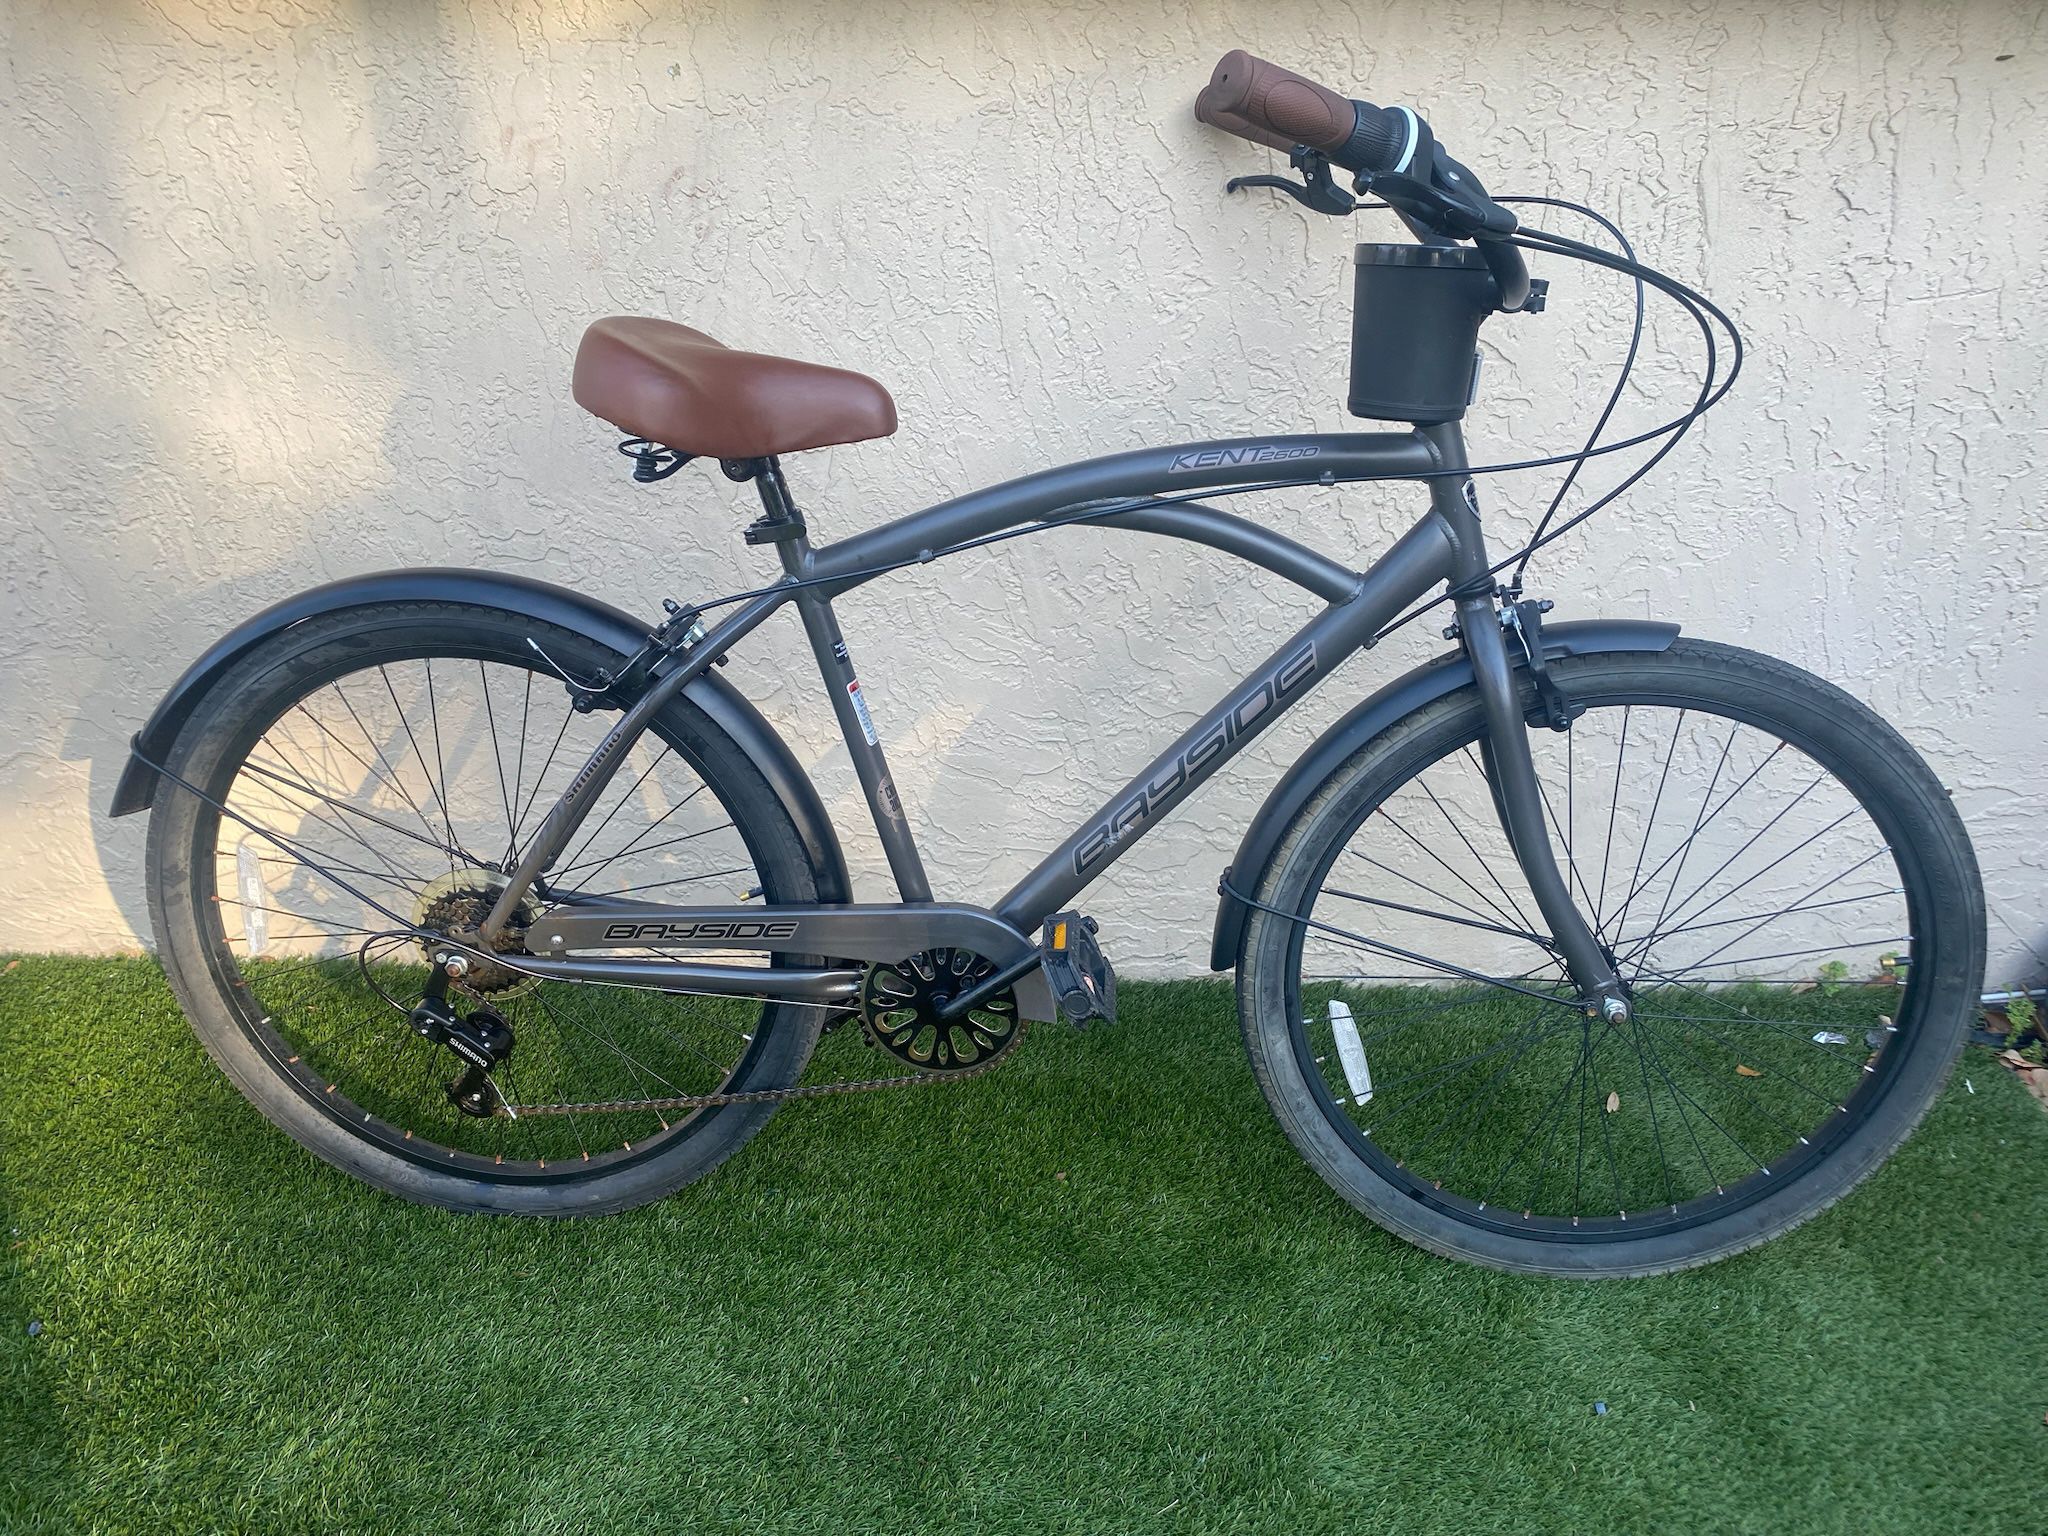 Kent Bicycles 26-inch Bayside Men's Cruiser Bicycle - See My Items 